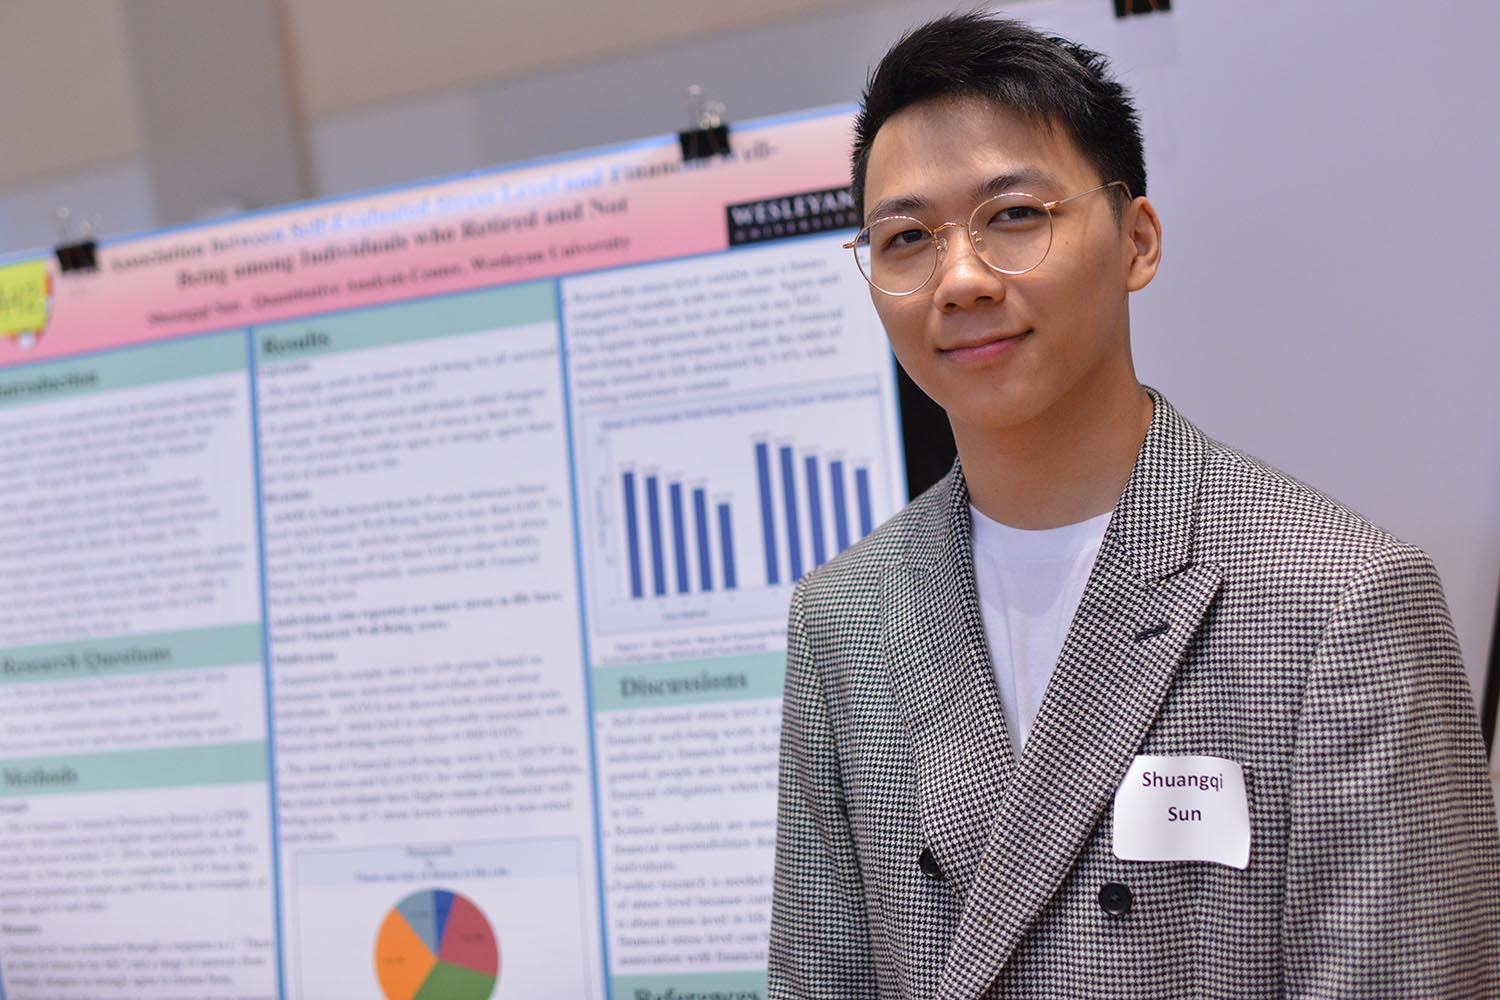 Shuangqi Sun '21 presented his poster about "The Association between Self-Evaluated Stress Level and Financial Well-Being among Individuals who Retired and Not."